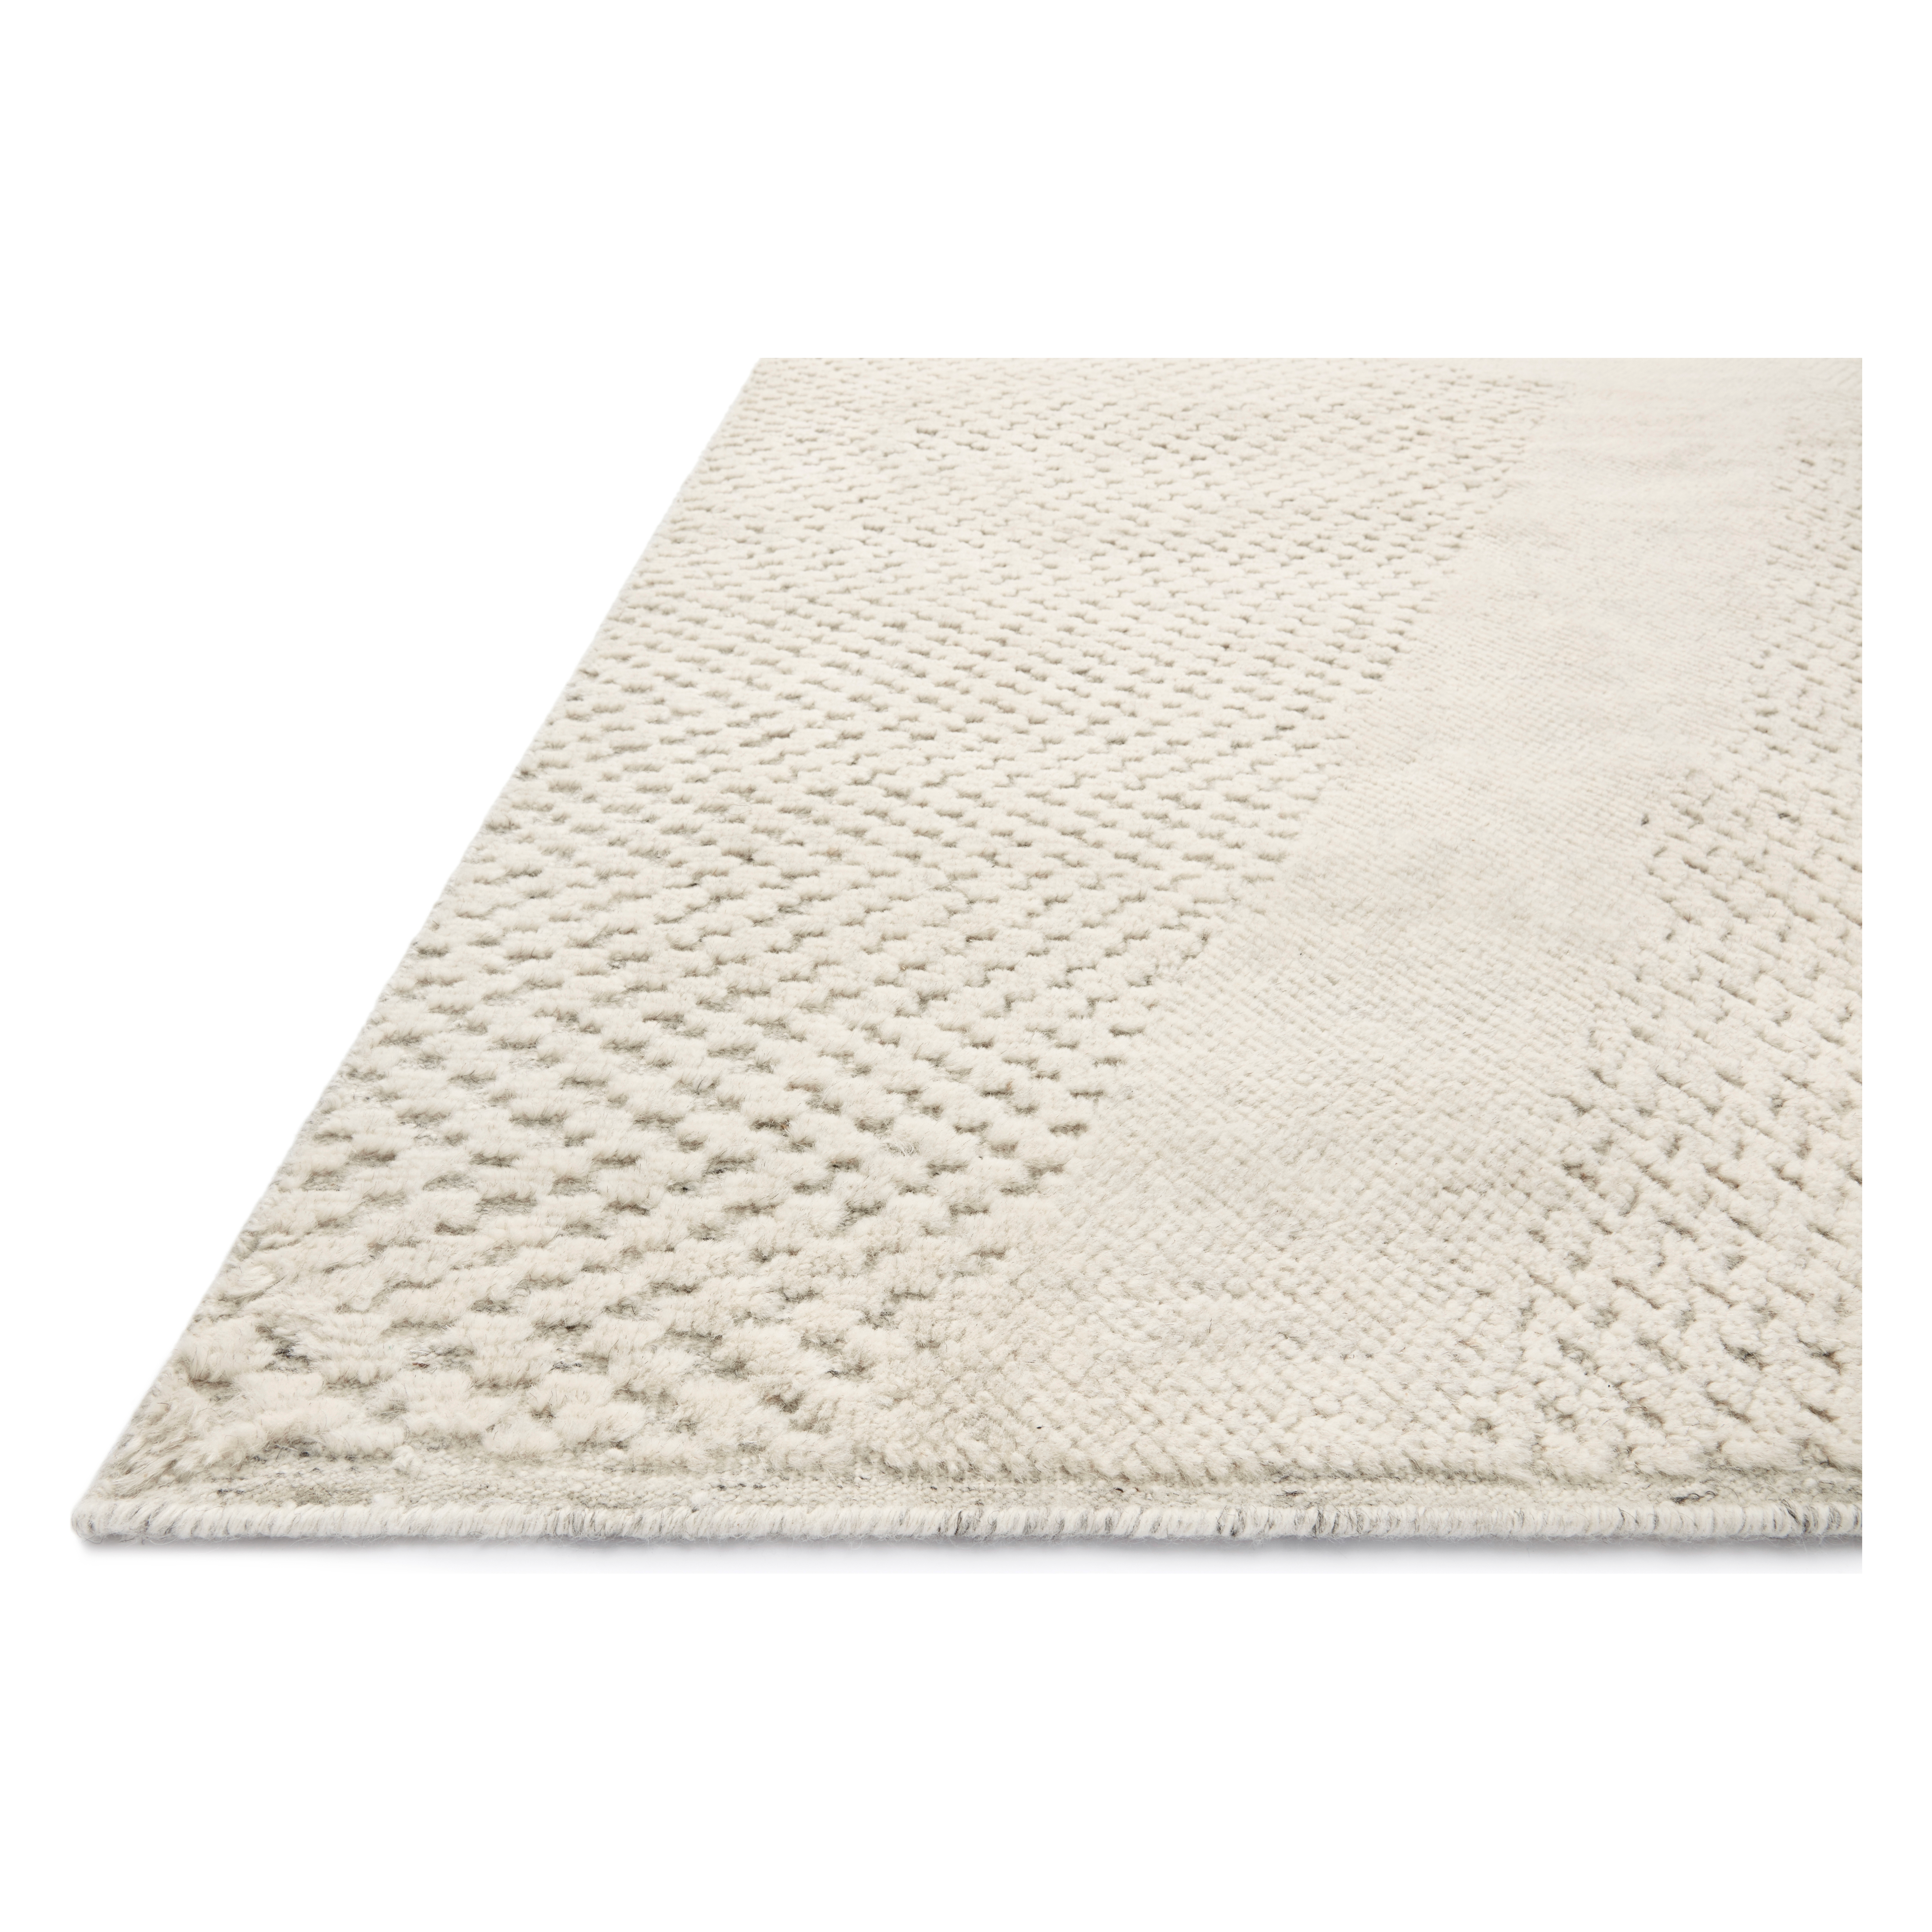 The Collins COI-02 Amber Lewis x Loloi Ivory / Ivory rug for Amber Lewis x Loloi is hand-knotted of wool and cotton by skilled artisans in India. Collins is also GoodWeave-Certified and features varying knotting techniques interwoven to create a uniquely texture pattern, elevating any space with this versatile neutral. Amethyst Home provides interior design, new construction, custom furniture, and rugs for the Winter Park and Orlando metro area.